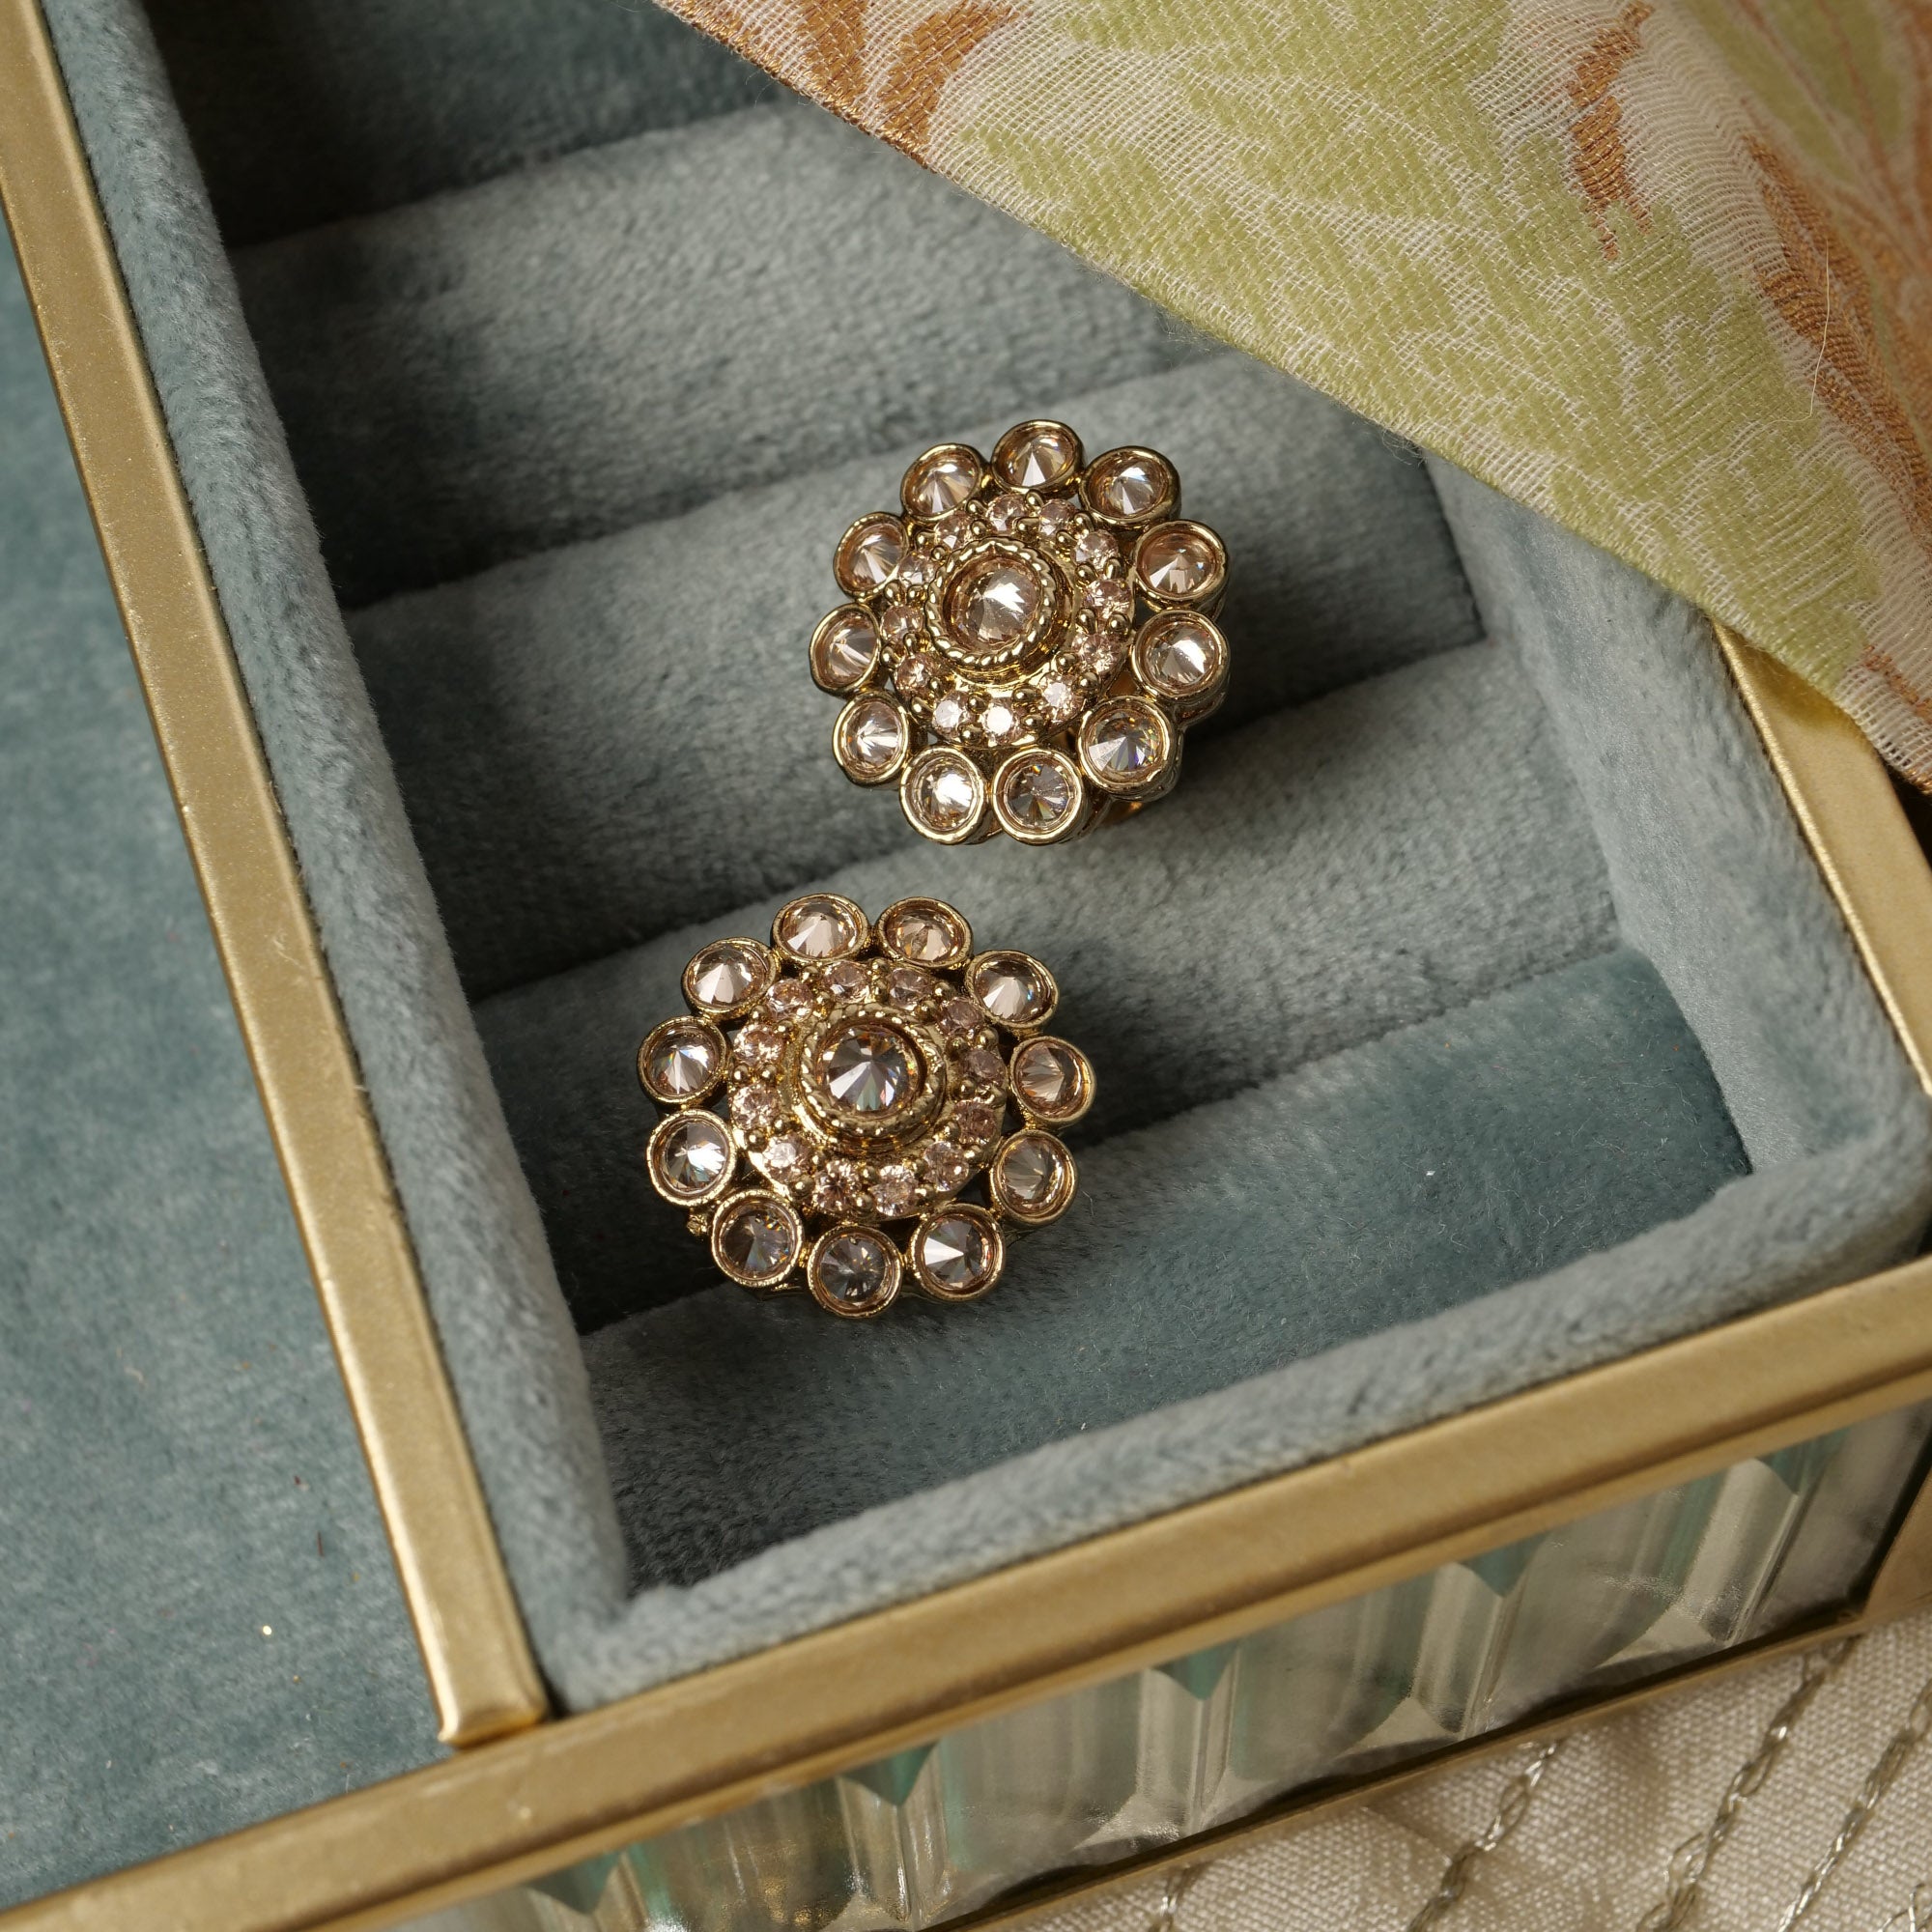 Antique Gold Stud Earrings in Champagne